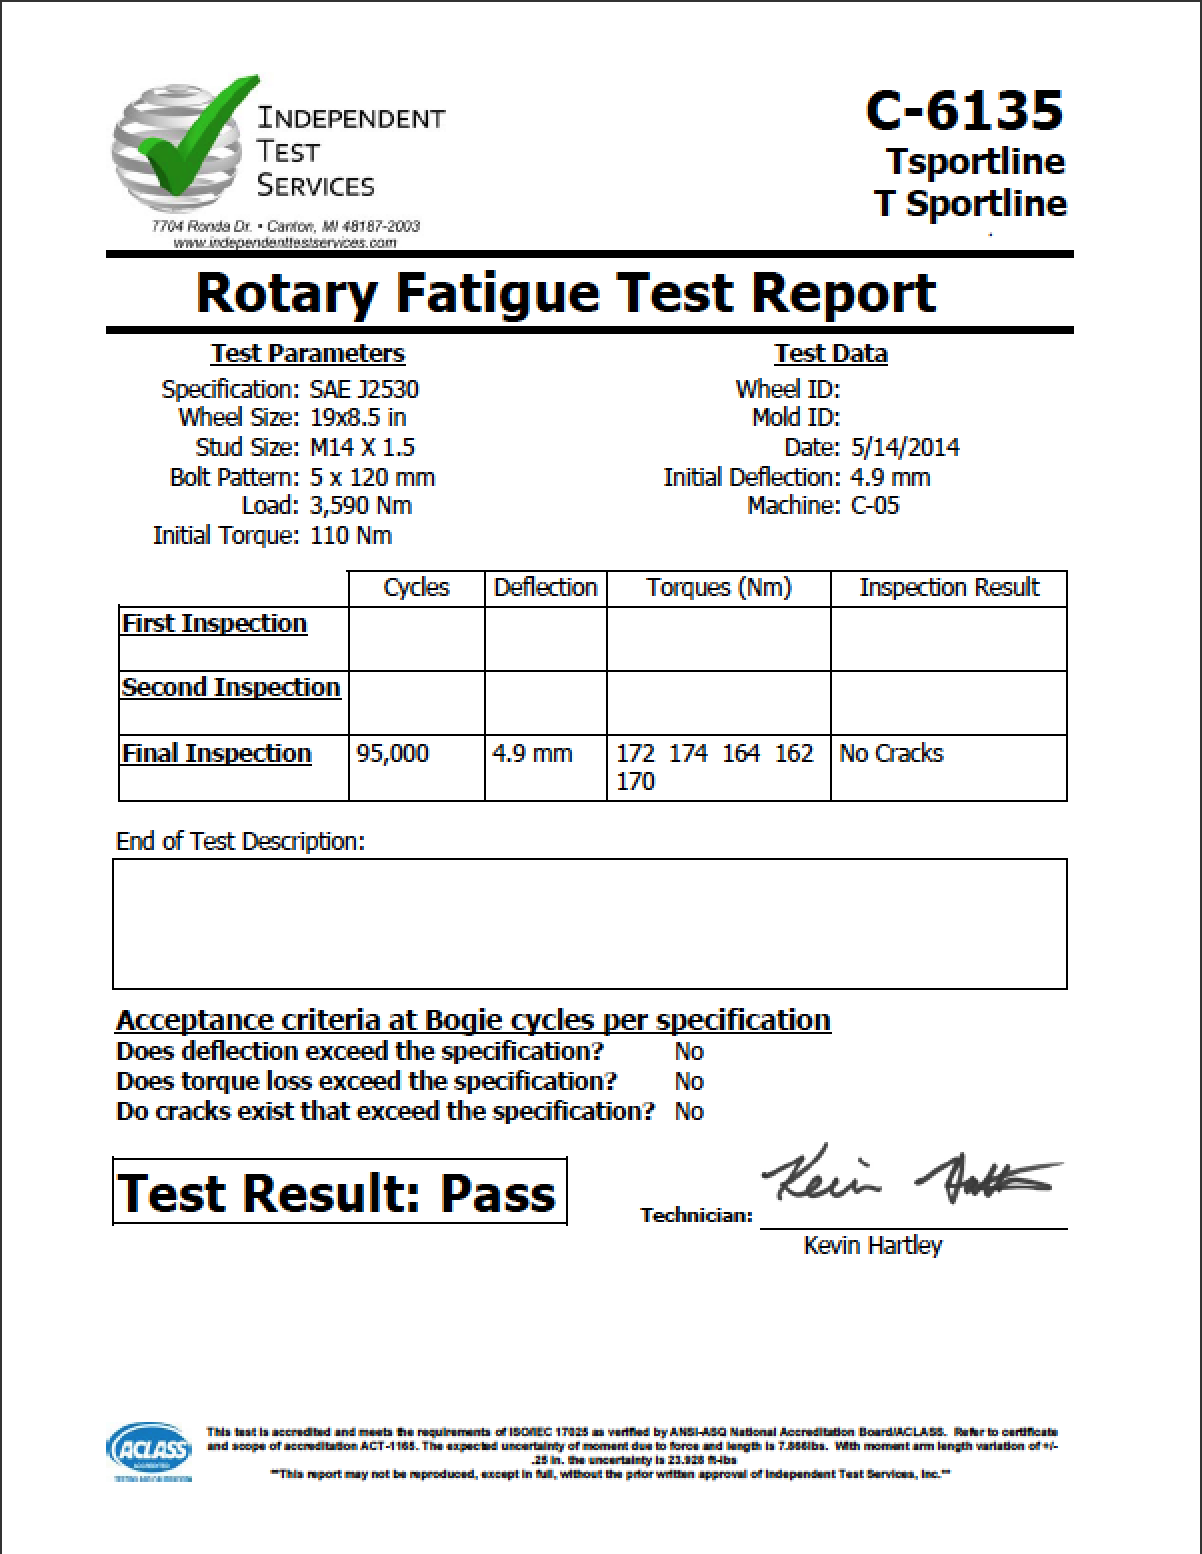 TST-Rotary-Fatigue-Test-Report.png